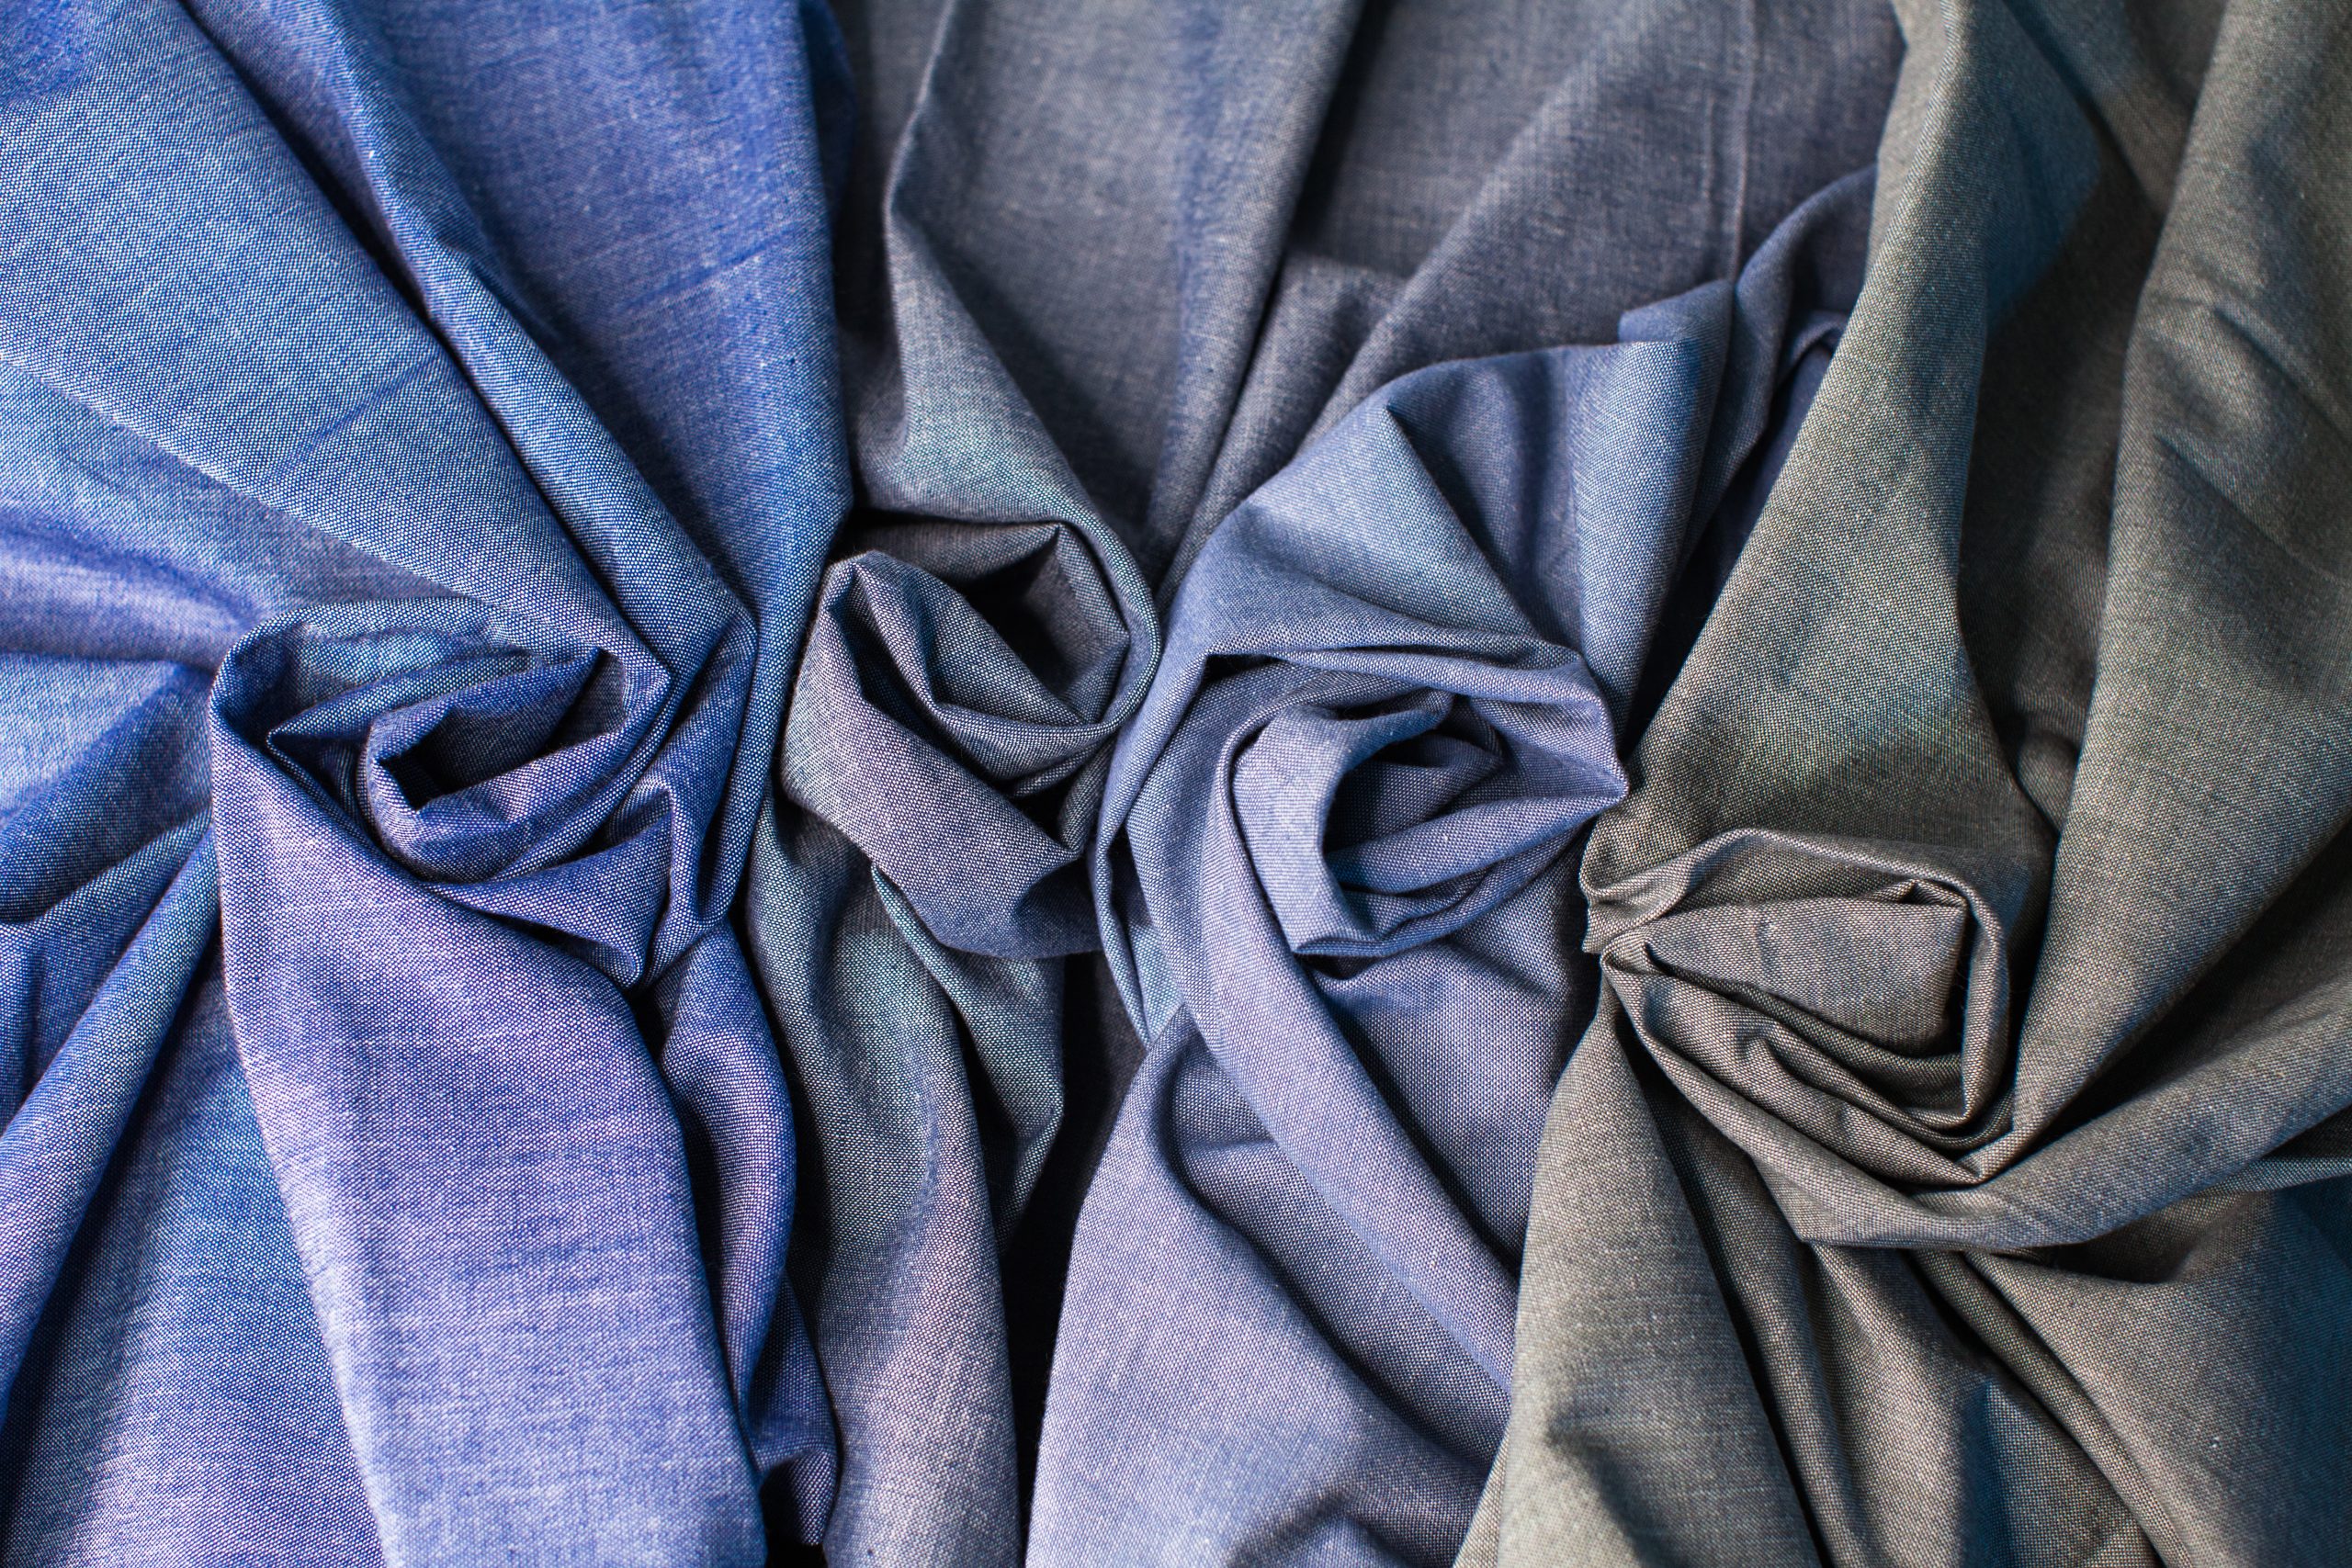 photograph from above four blue selvedge textiles with a twist